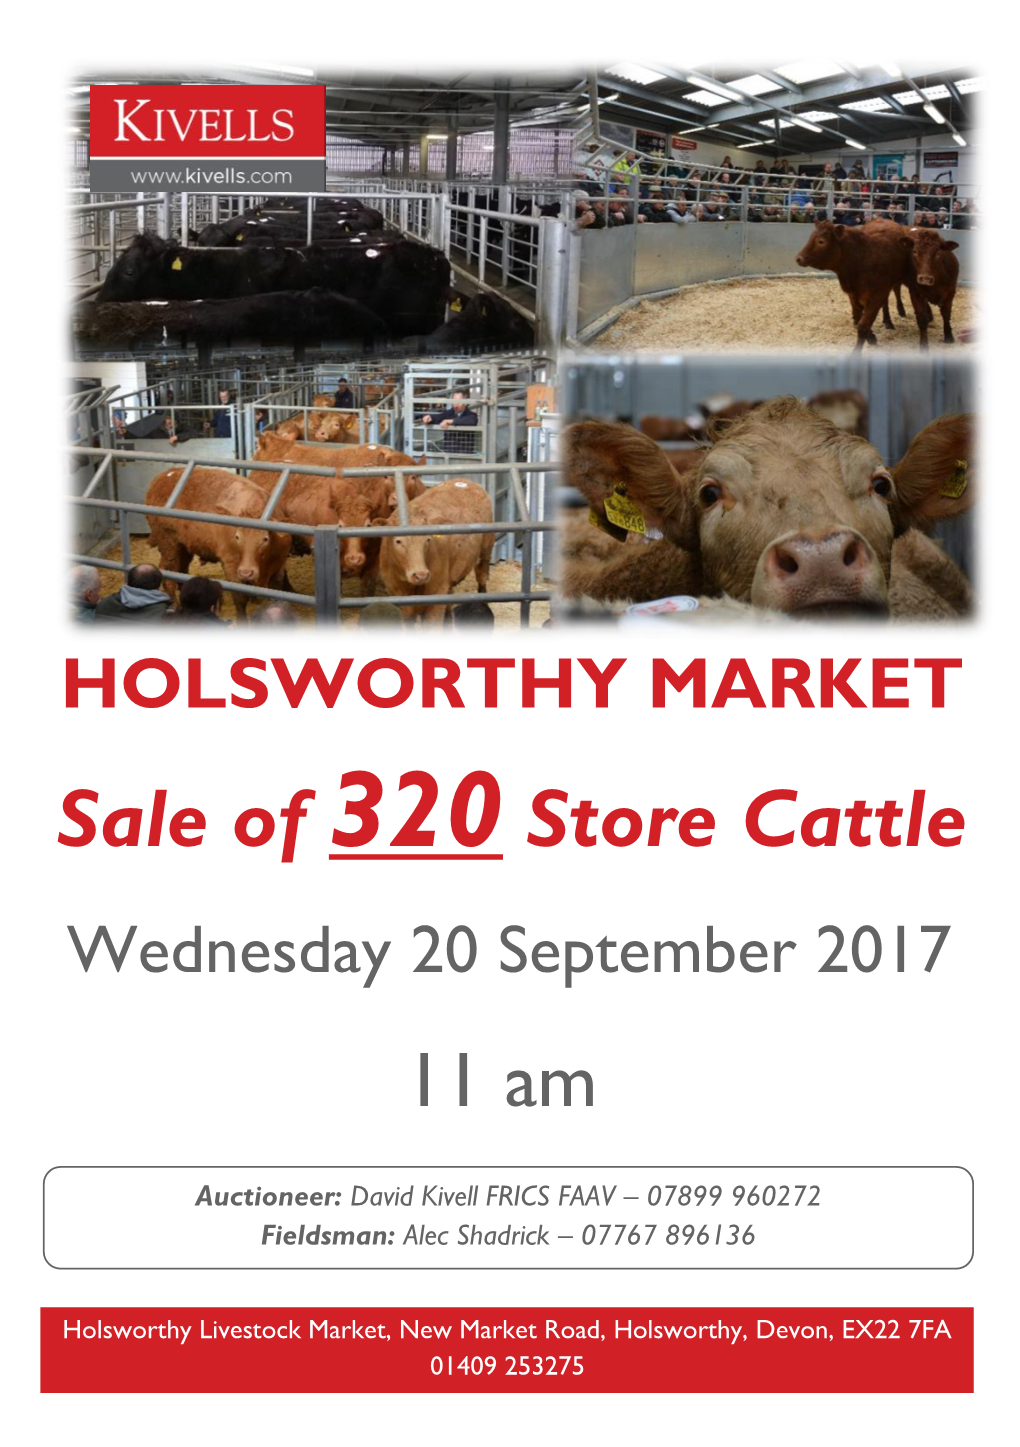 Sale of 320 Store Cattle